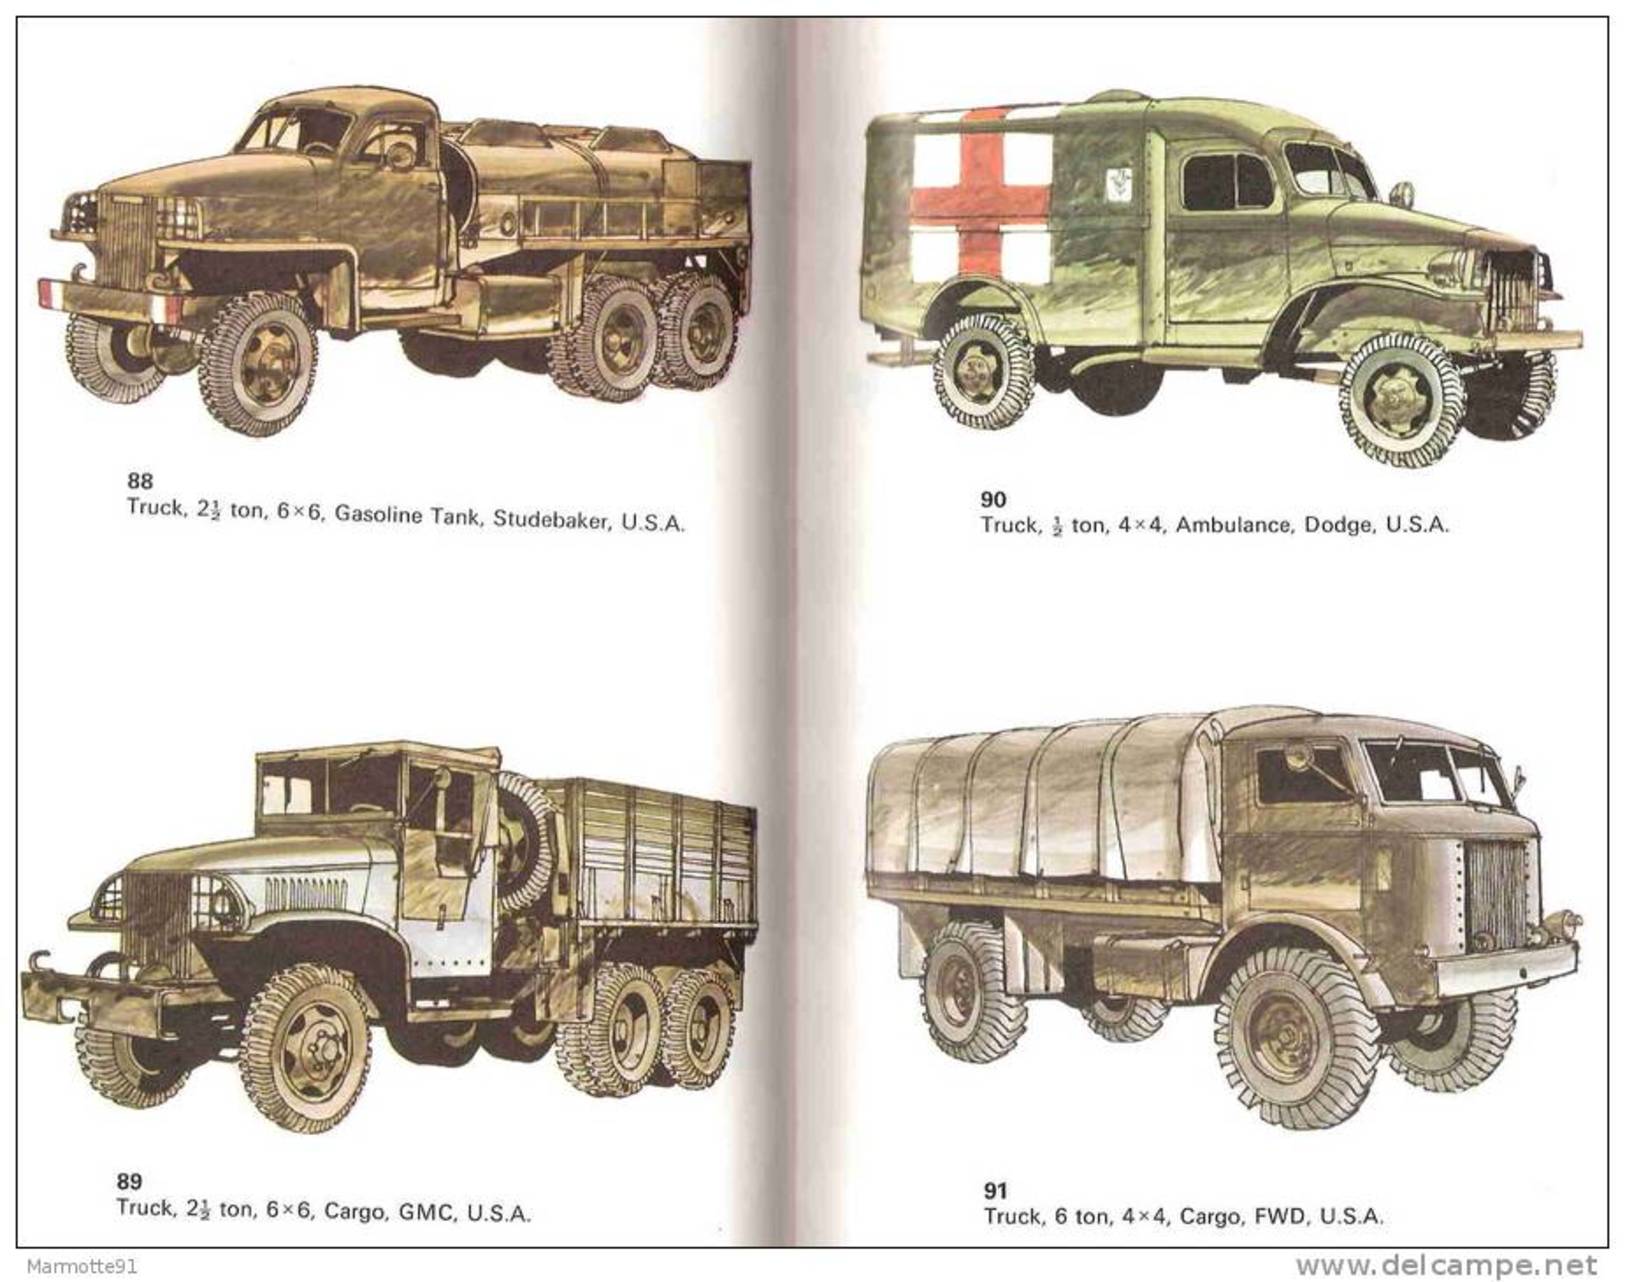 MILITARY TRANSPORT WW2 VEHICULE TRANSPORT MILITAIRE ARMEE GUERRE 1939 CAMION TRAIN VOITURE MOTO RAIL - Véhicules